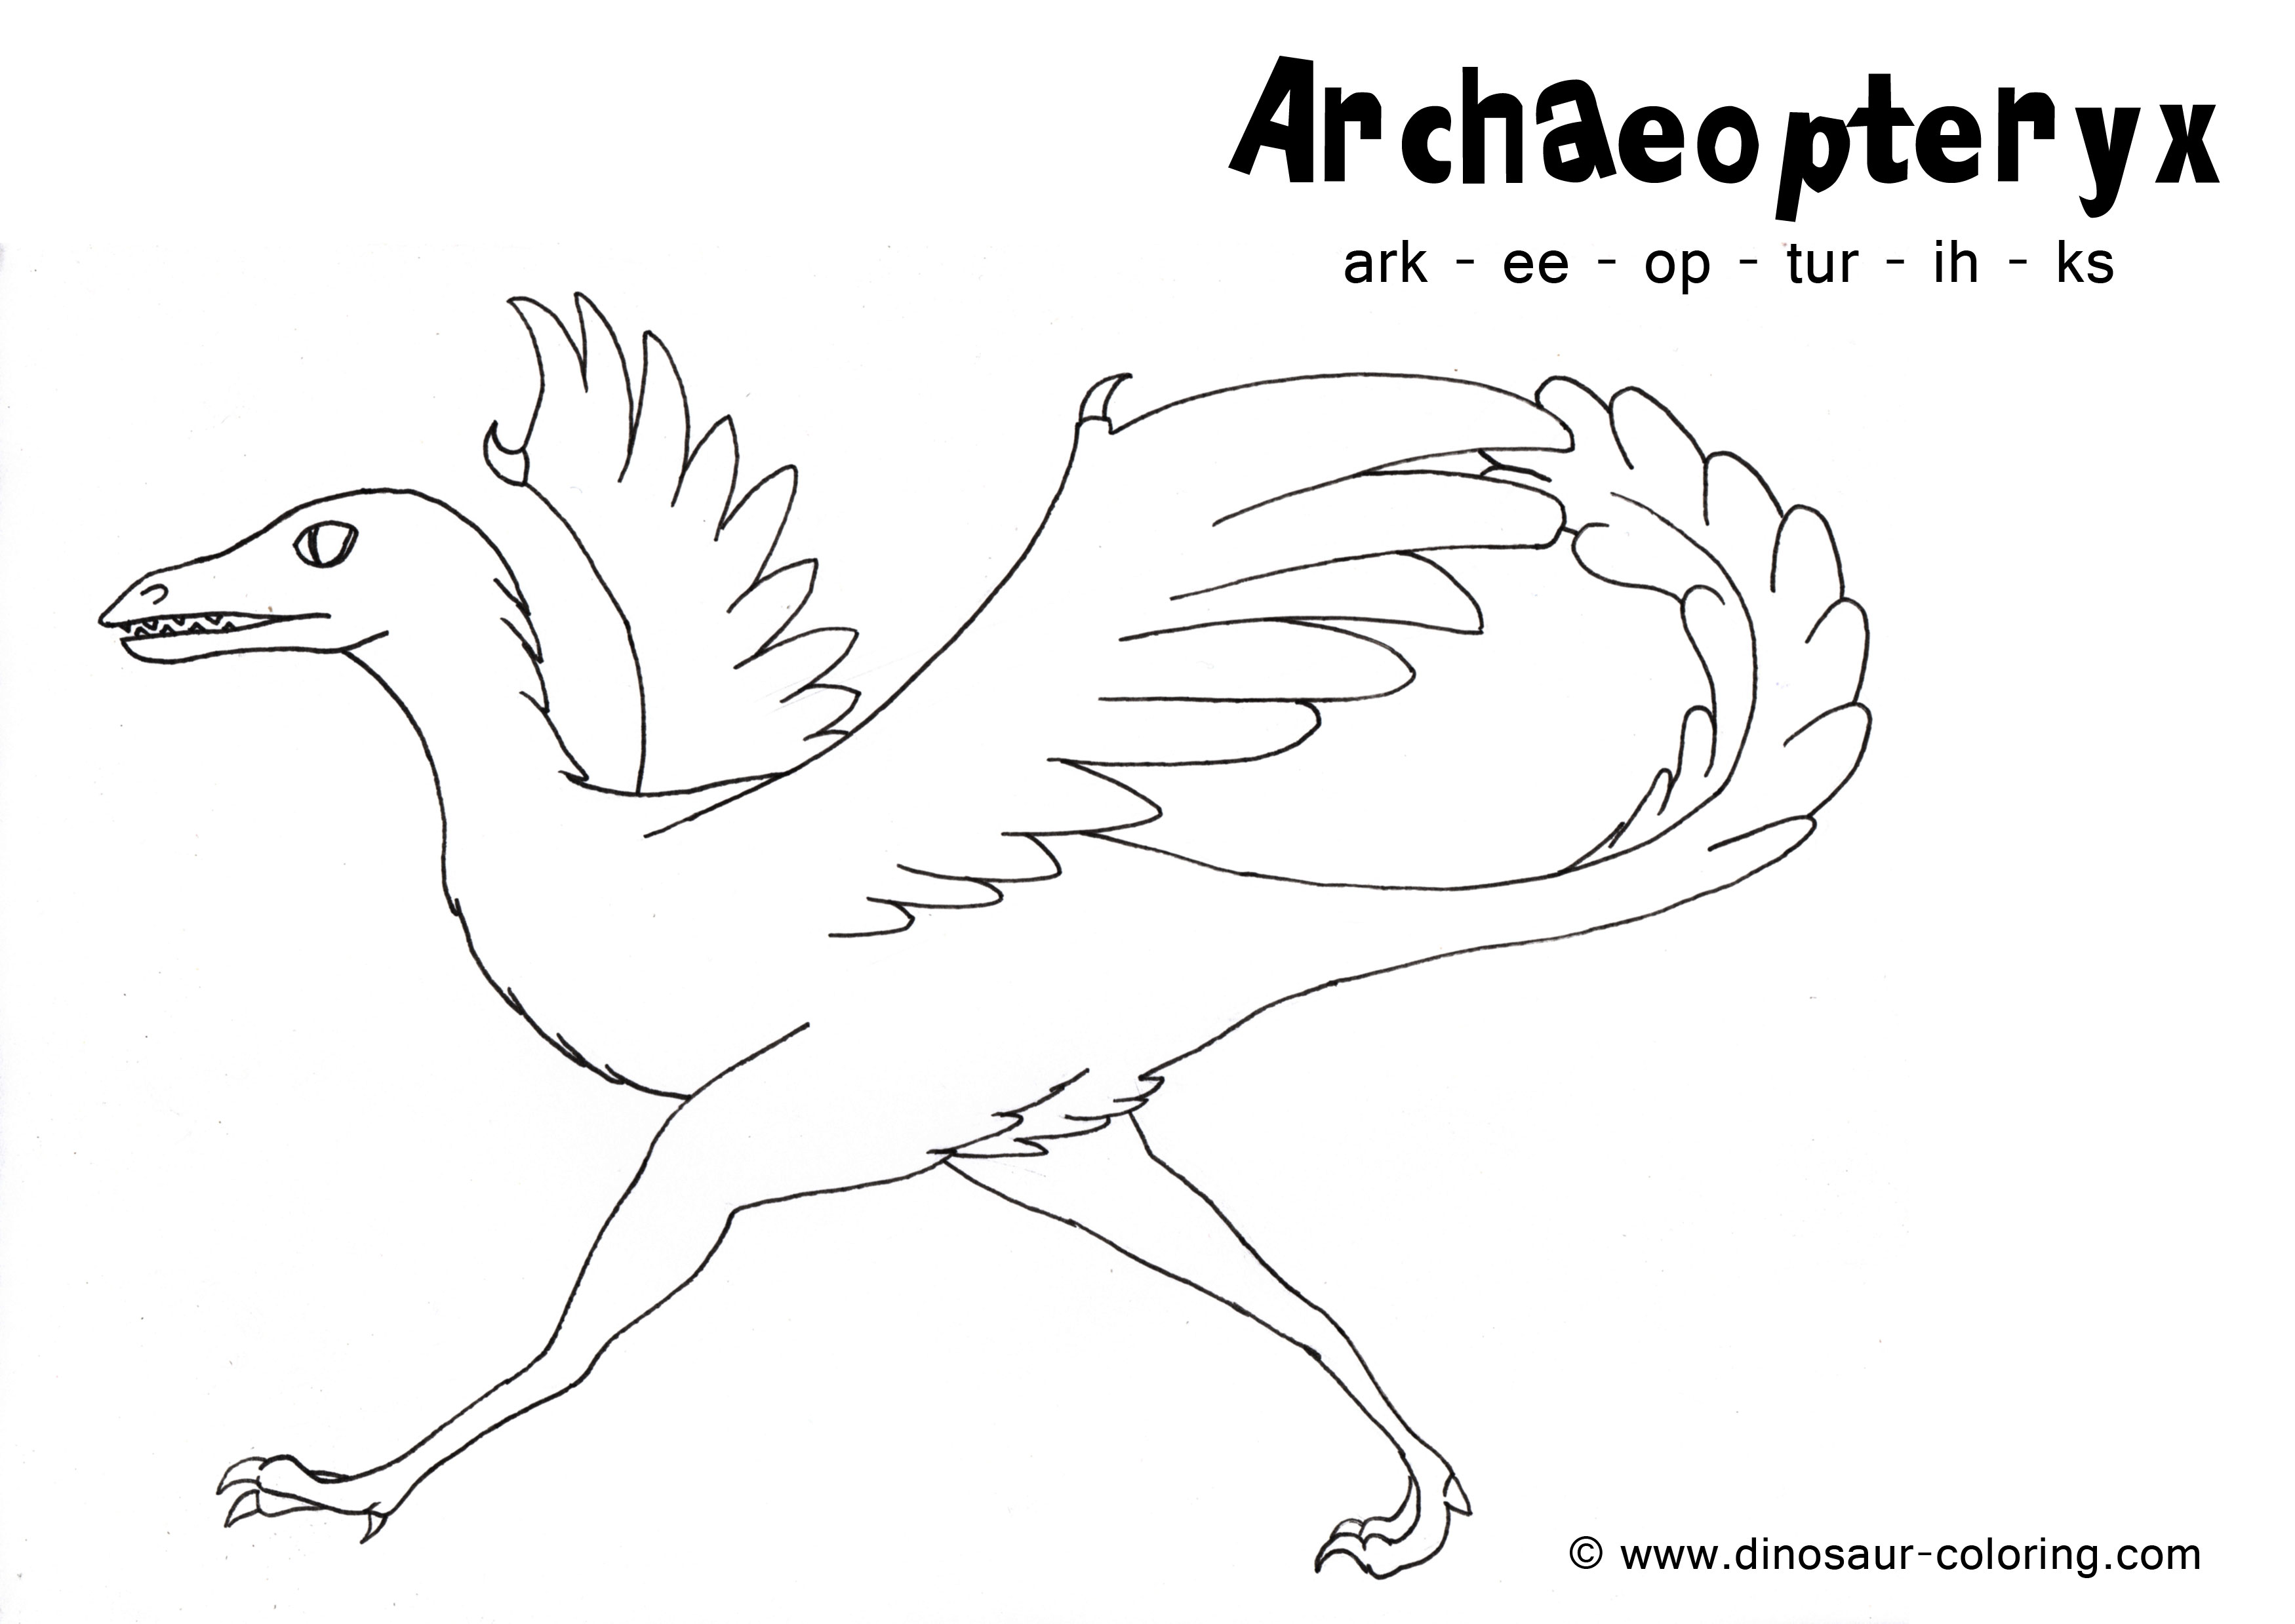 Archaeopteryx coloring #2, Download drawings